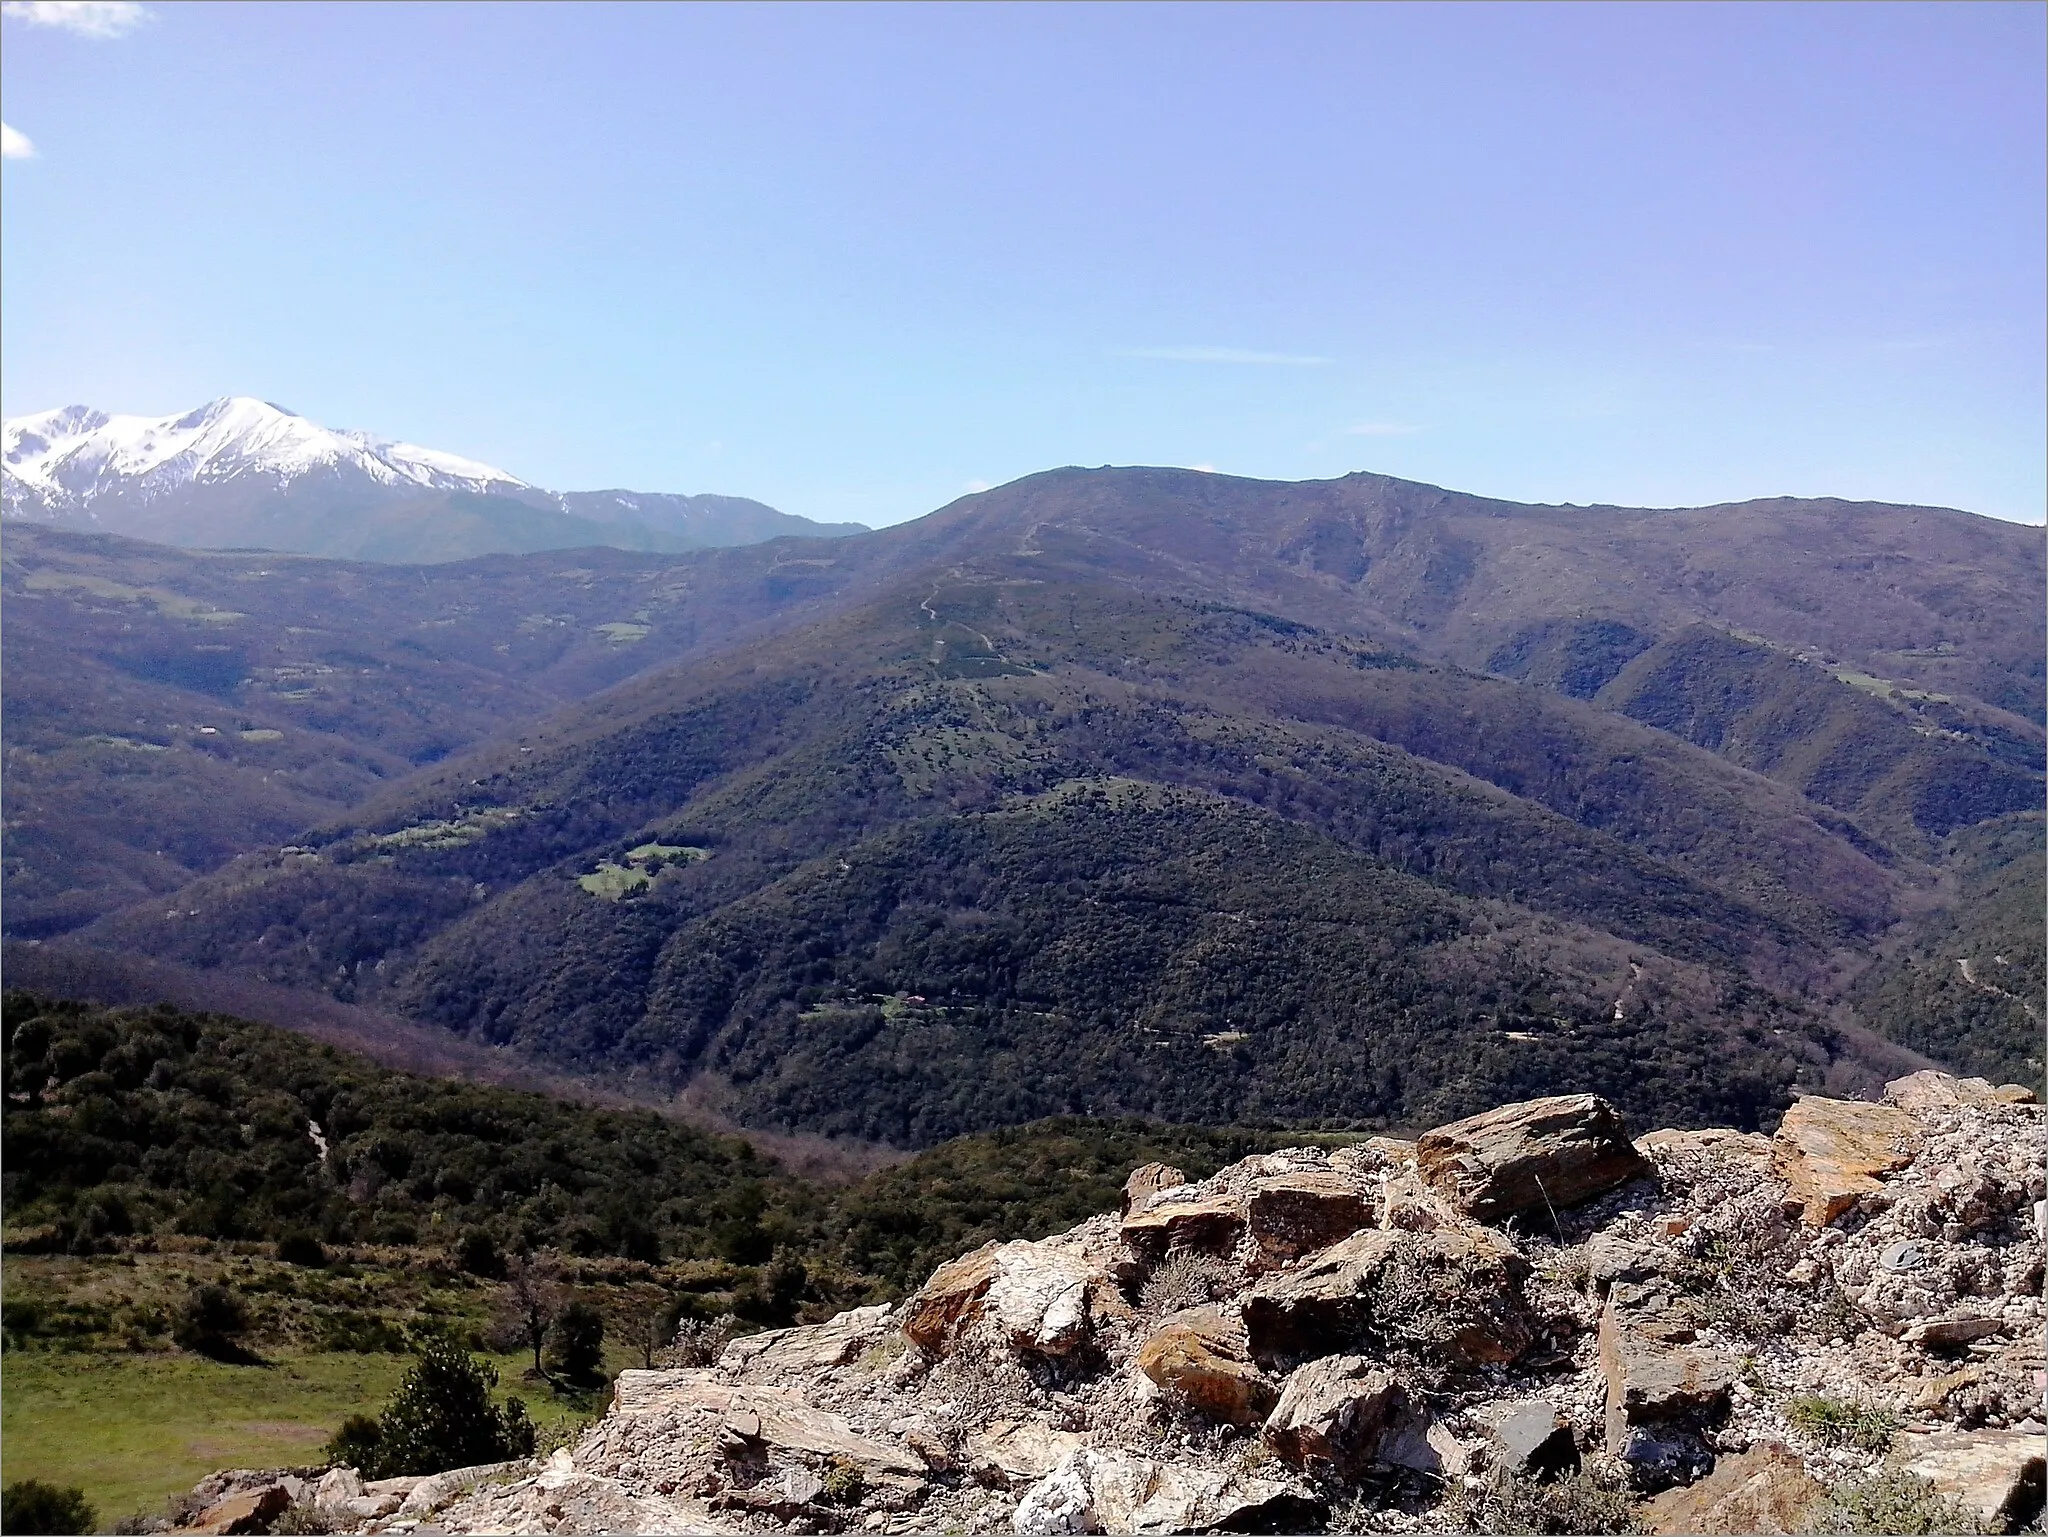 Photo showing: View to the west from the remains of Belpuig castle across the Boulès valley to Santa Anna dels Quatre Termes, a summit at 1348 metres altitude in the Pyrénées-Orientales, France.
The snow-capped area to the left is the Massif du Canigou.